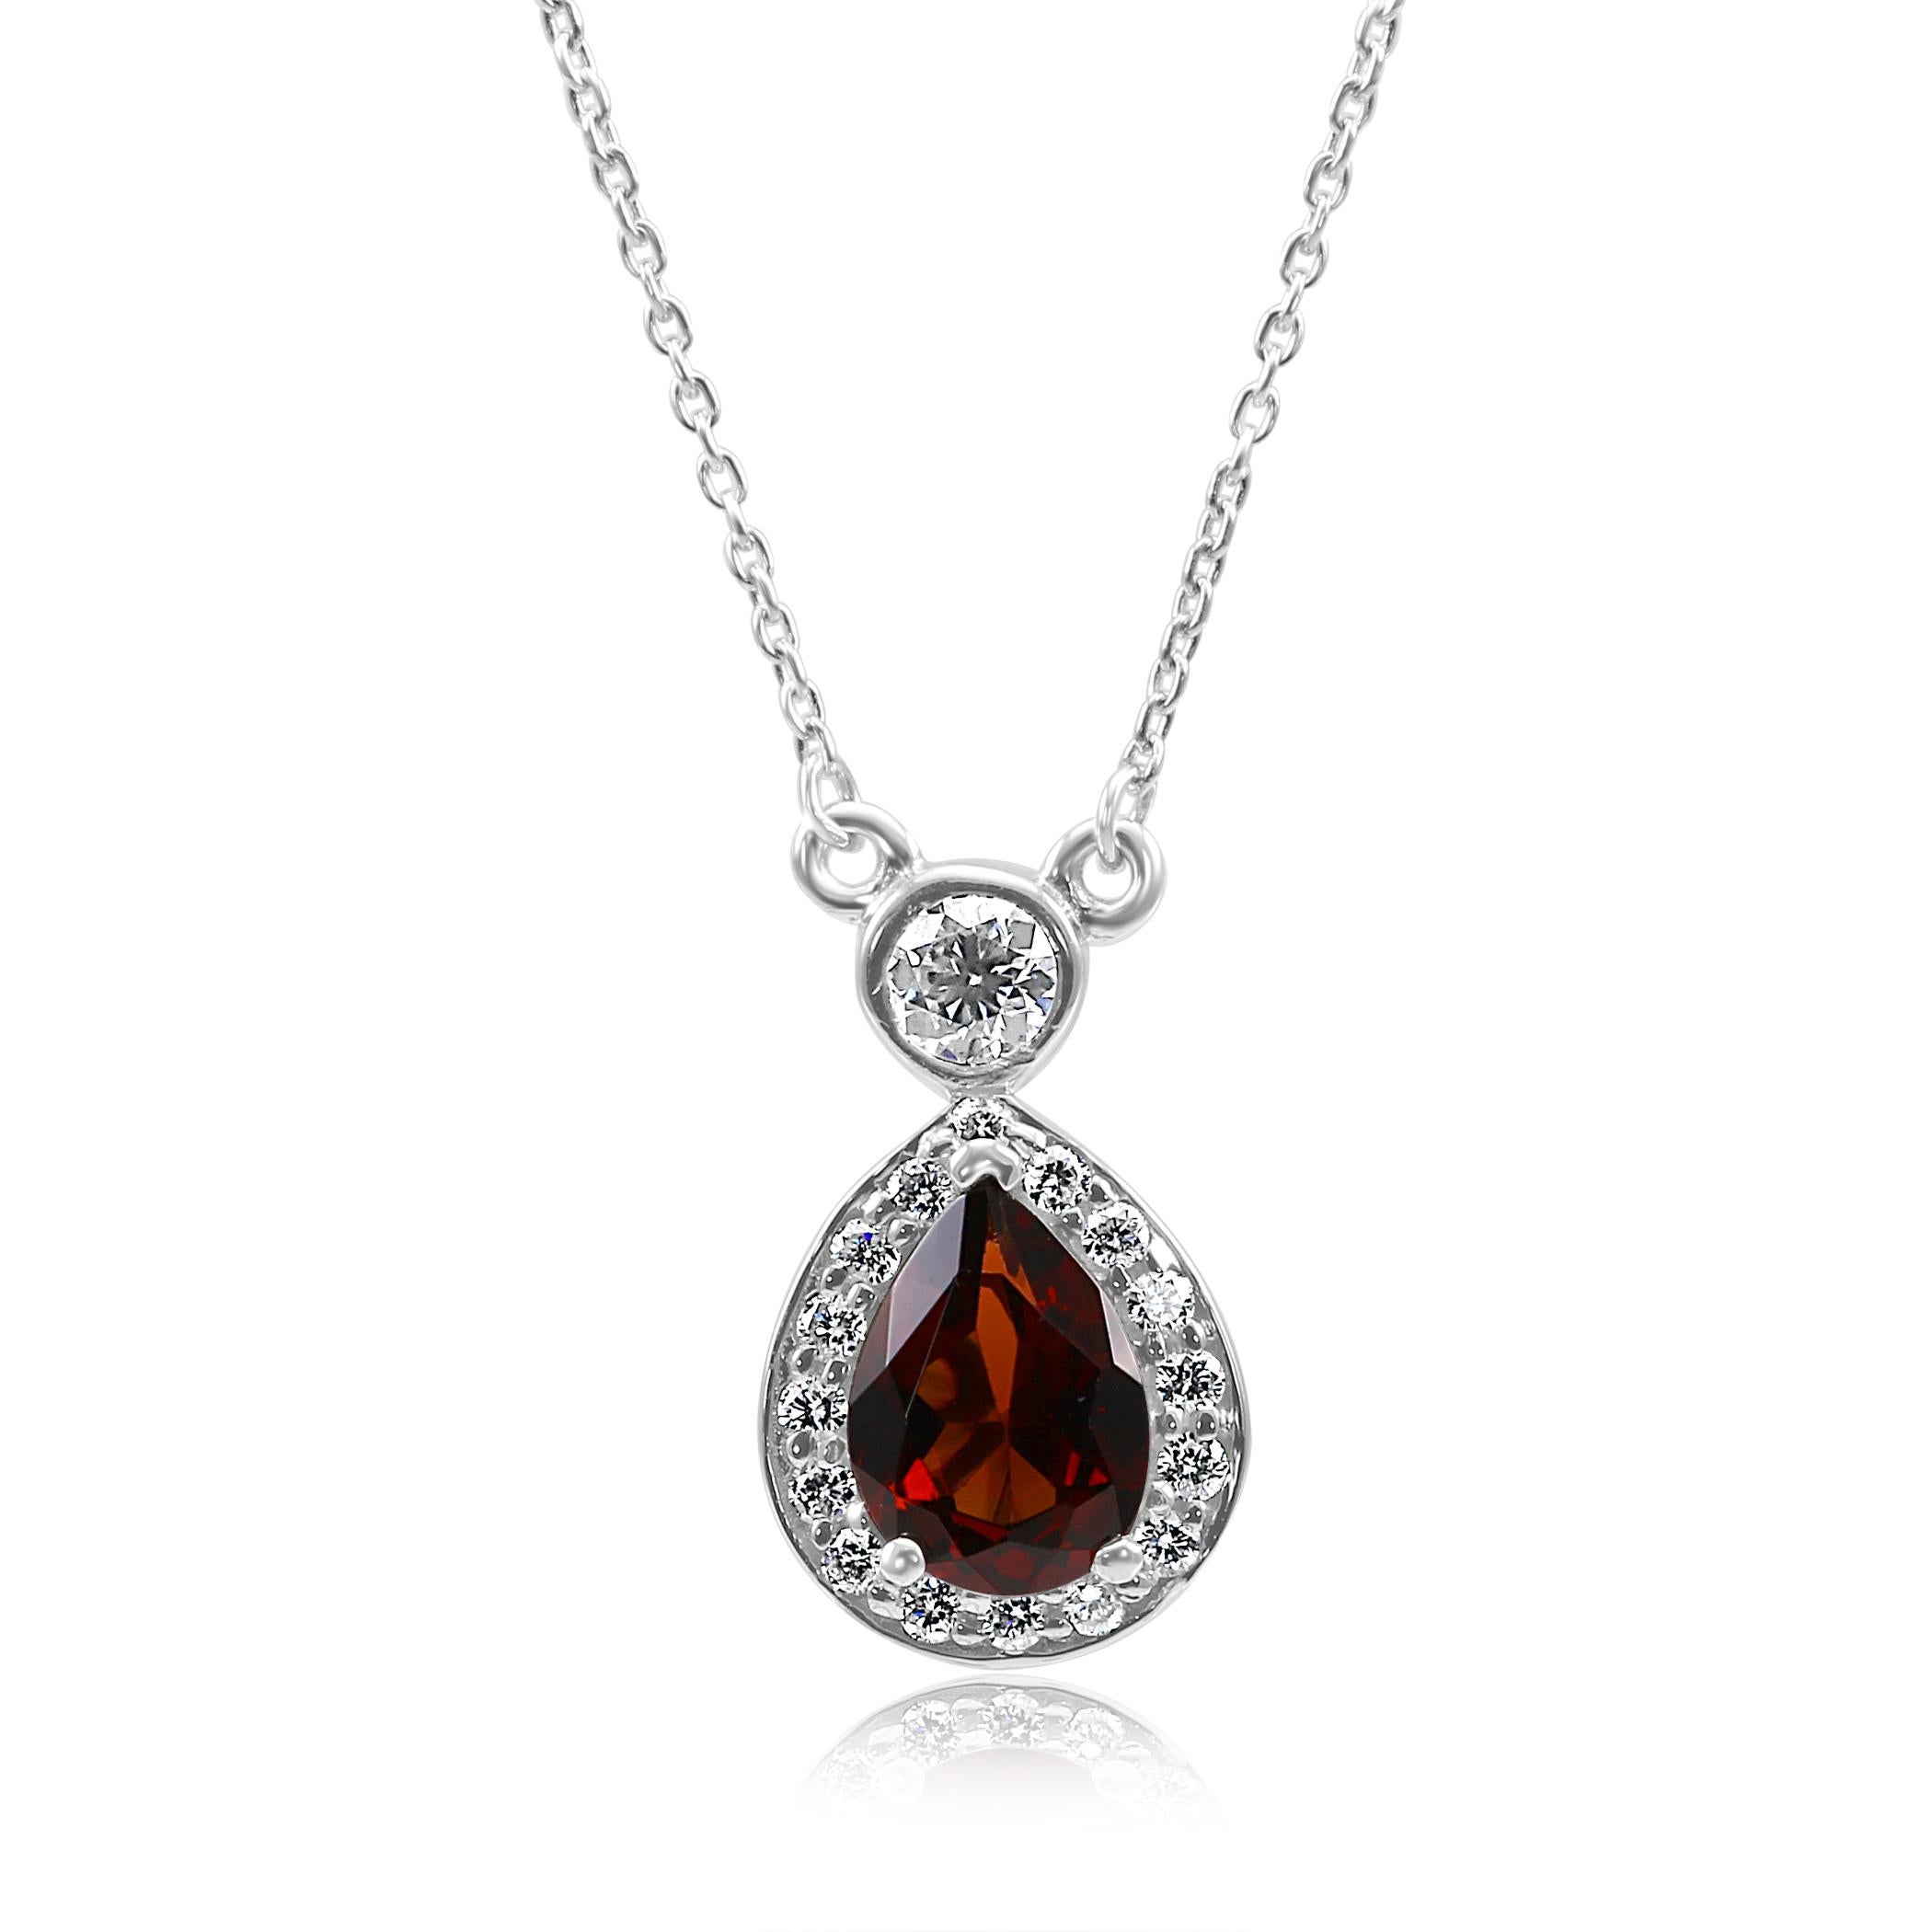 Stunning Garnet Pear 1.20 Carat encircled in a single 17 Halo of White G-H Color SI Clarity Round Diamonds 0.25 Carat set in 14K White Gold Drop Pendant Chain Necklace.

Total Weight 1.45 Carat

Style available in all gold colors and stone colors in